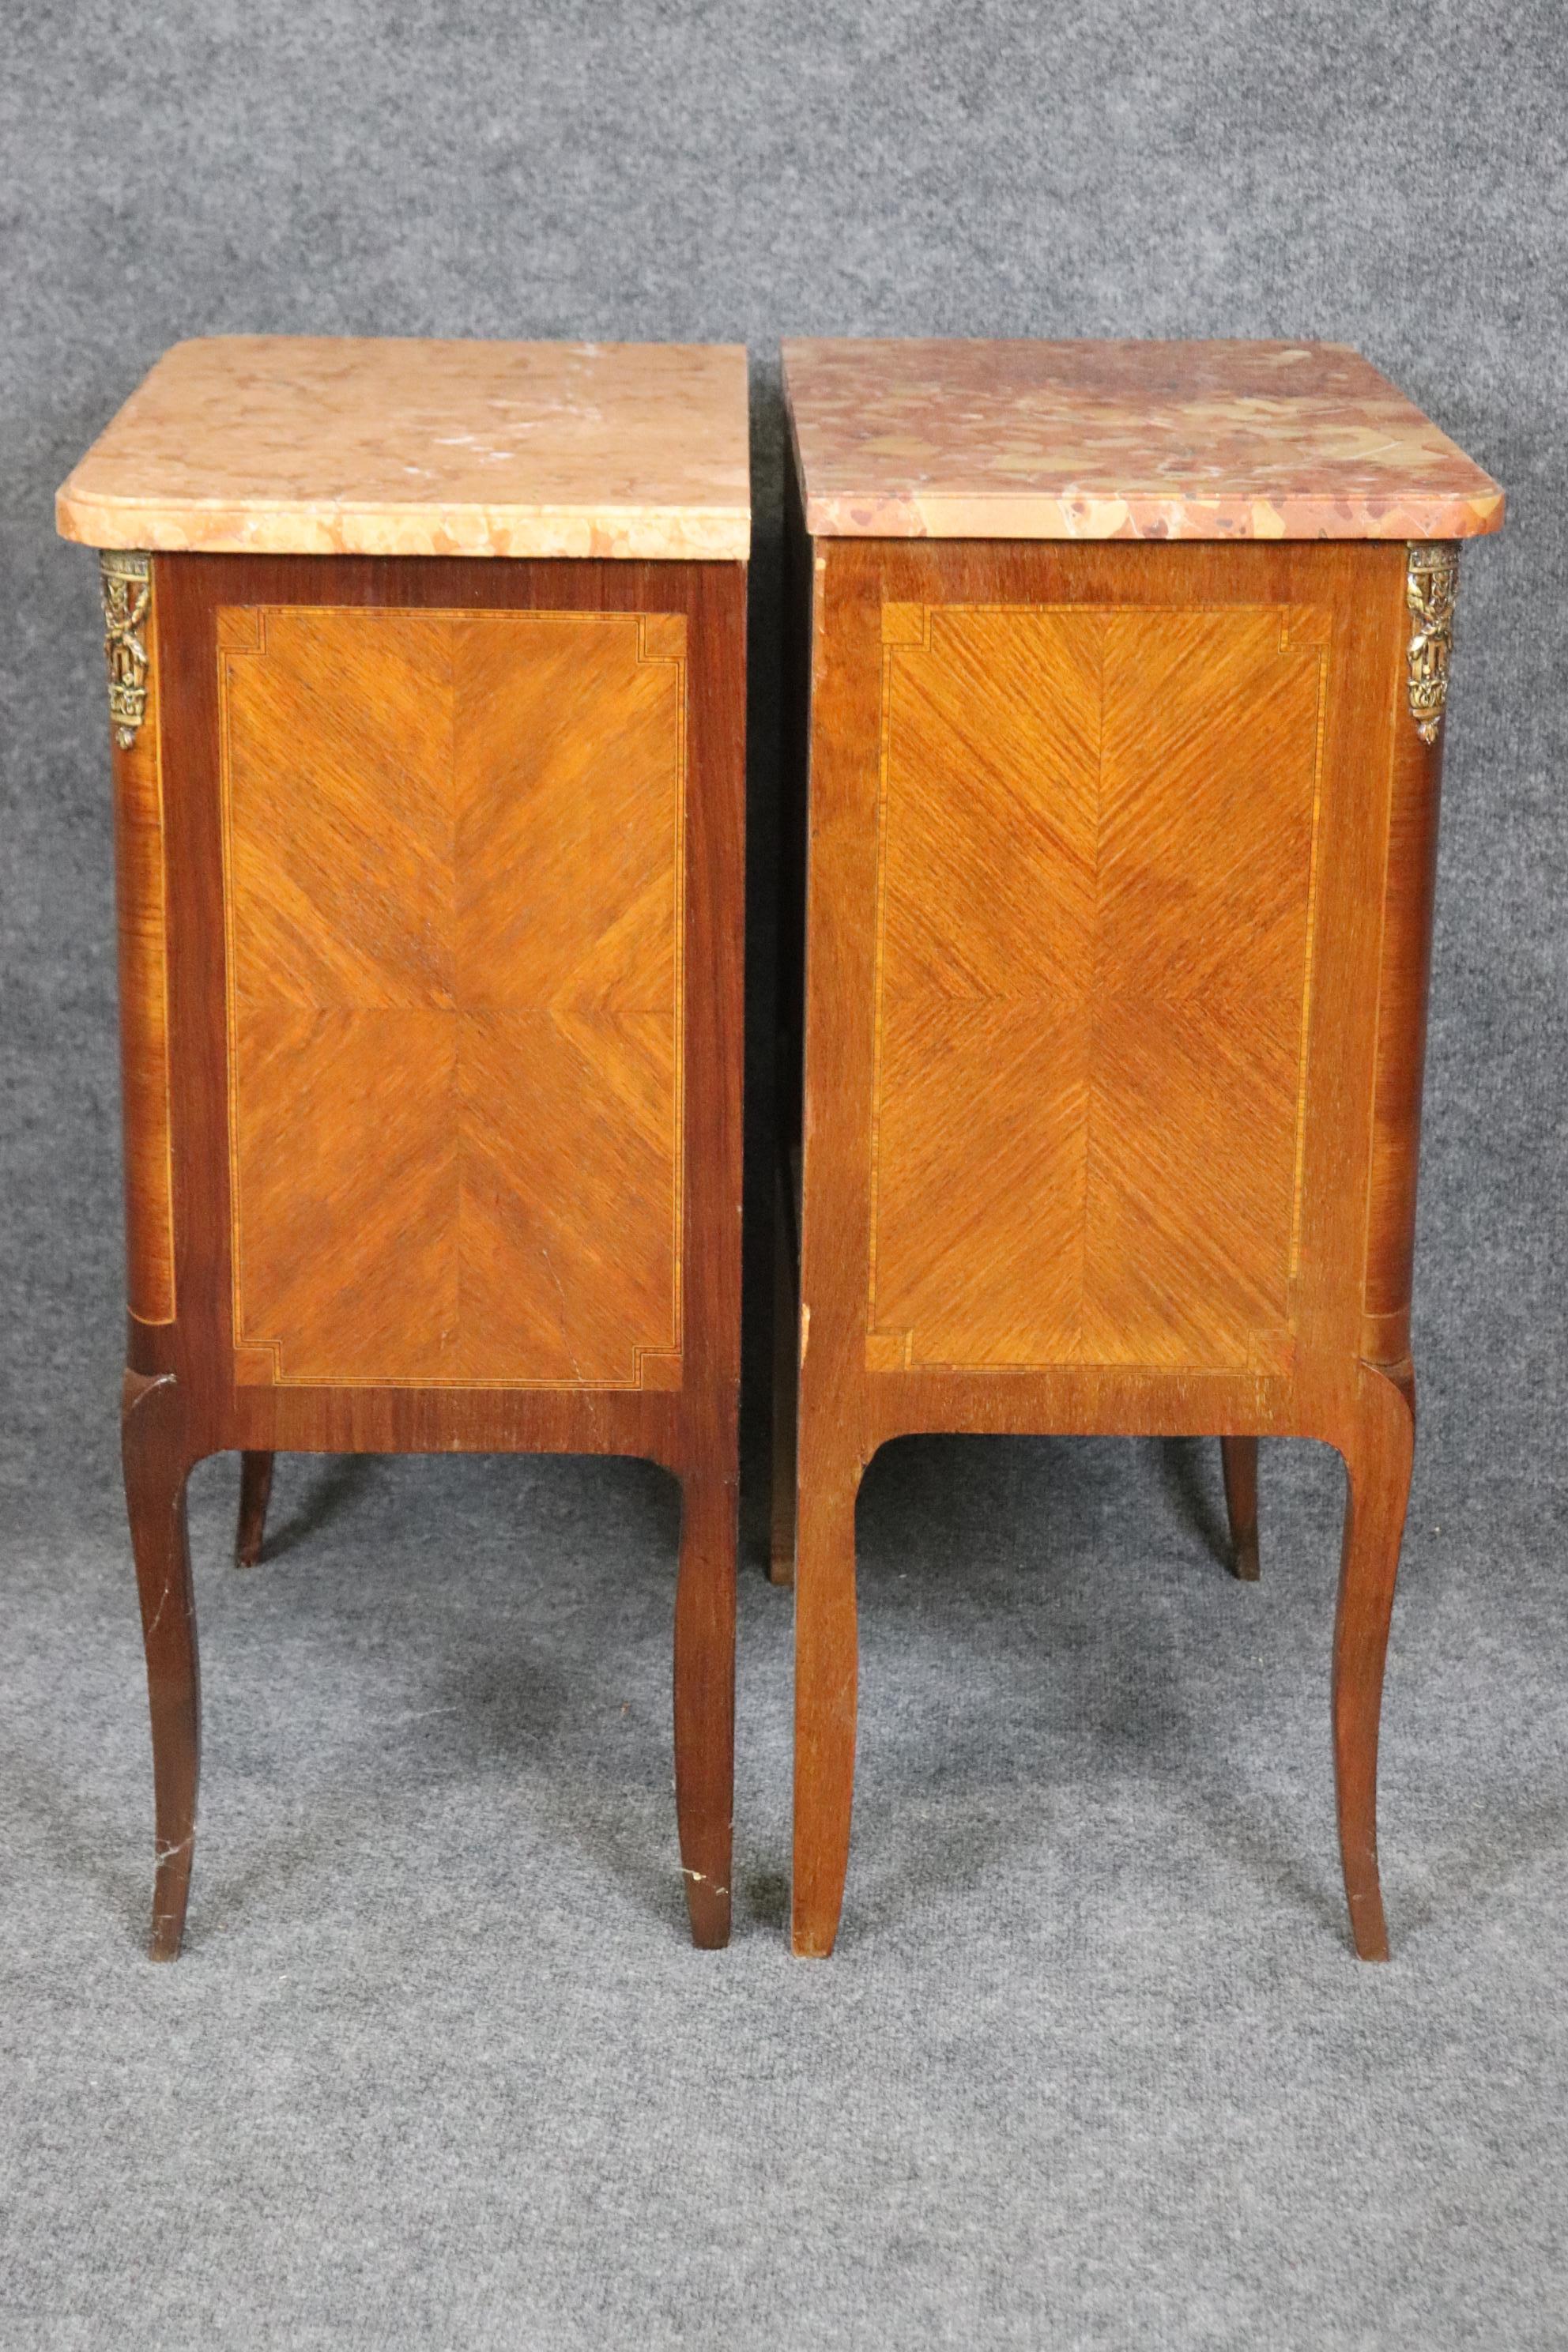 Companion Pair Inlaid French Marble Top Louis XV Nightstands Circa 1920s For Sale 1